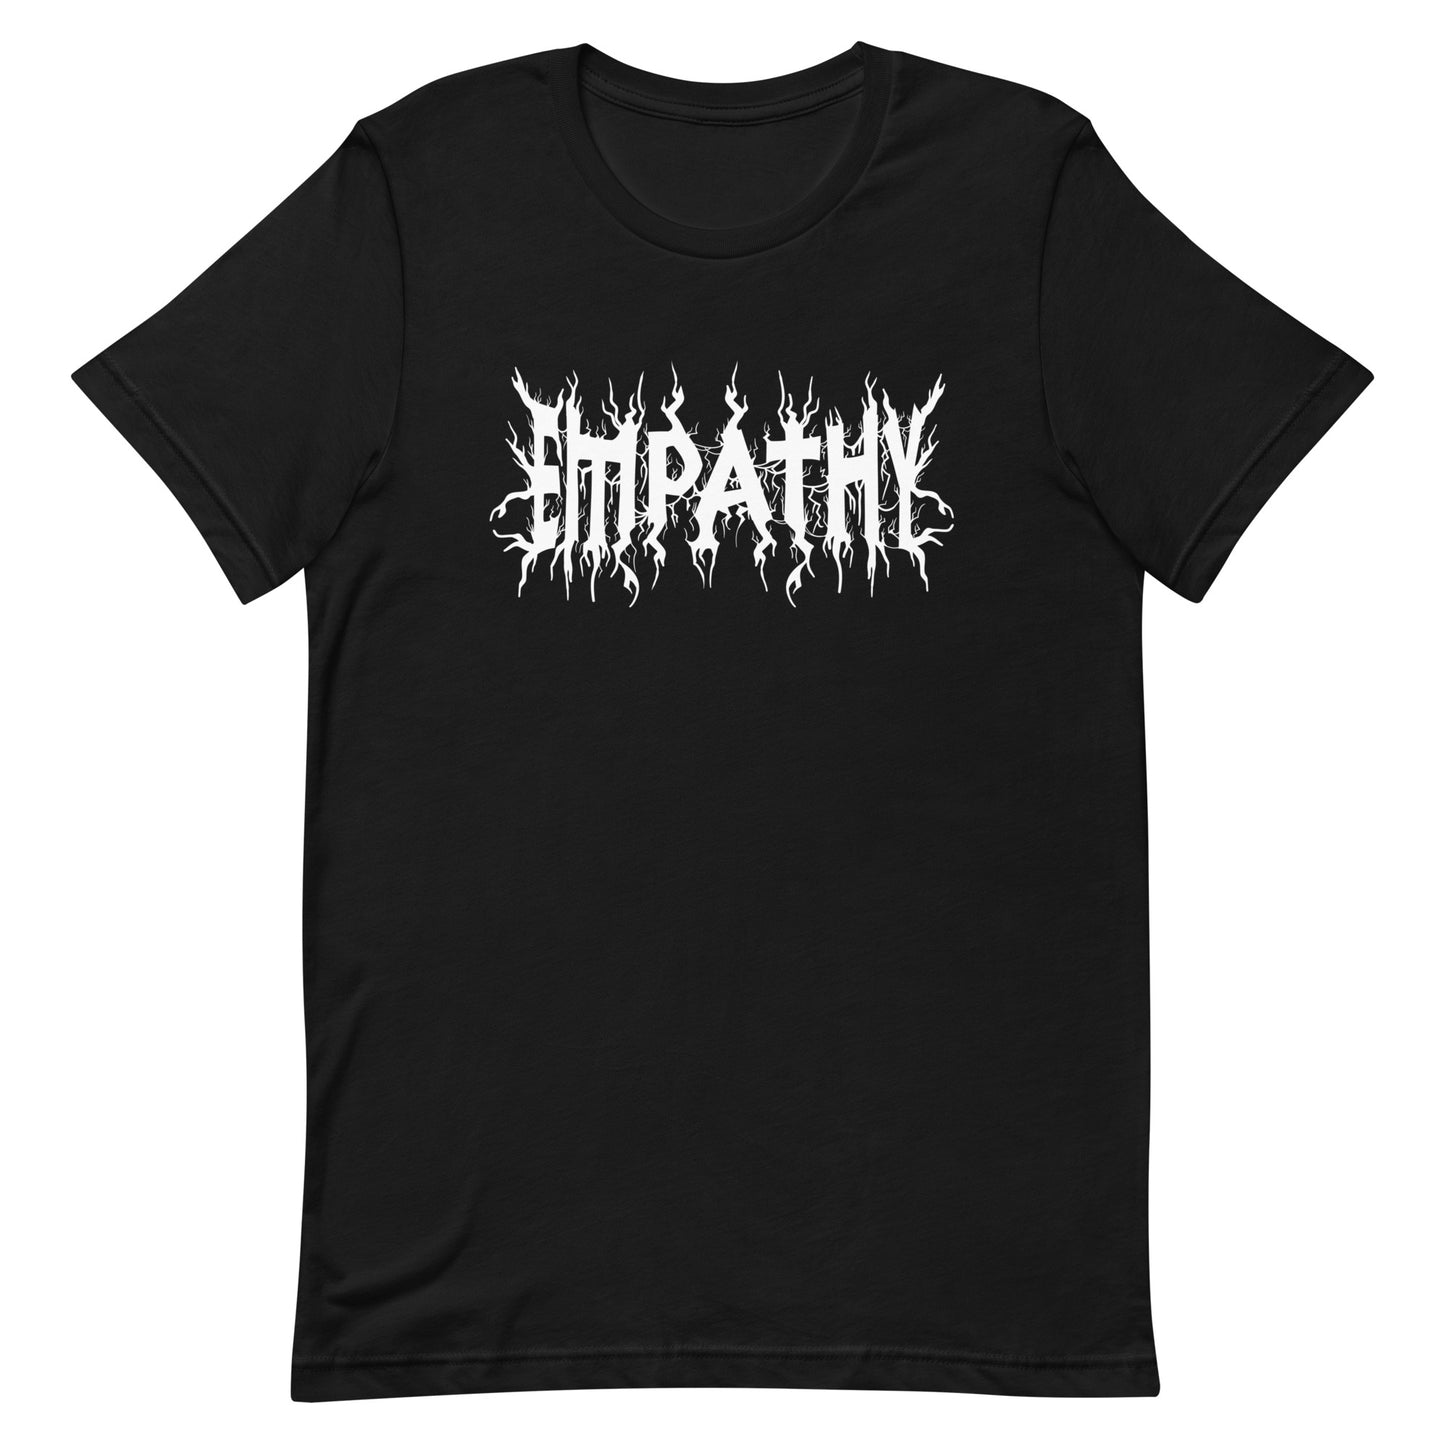 A black crewneck t-shirt featuring white text that reads "Empathy" in a jagged font in the style of heavy metal band t-shirts